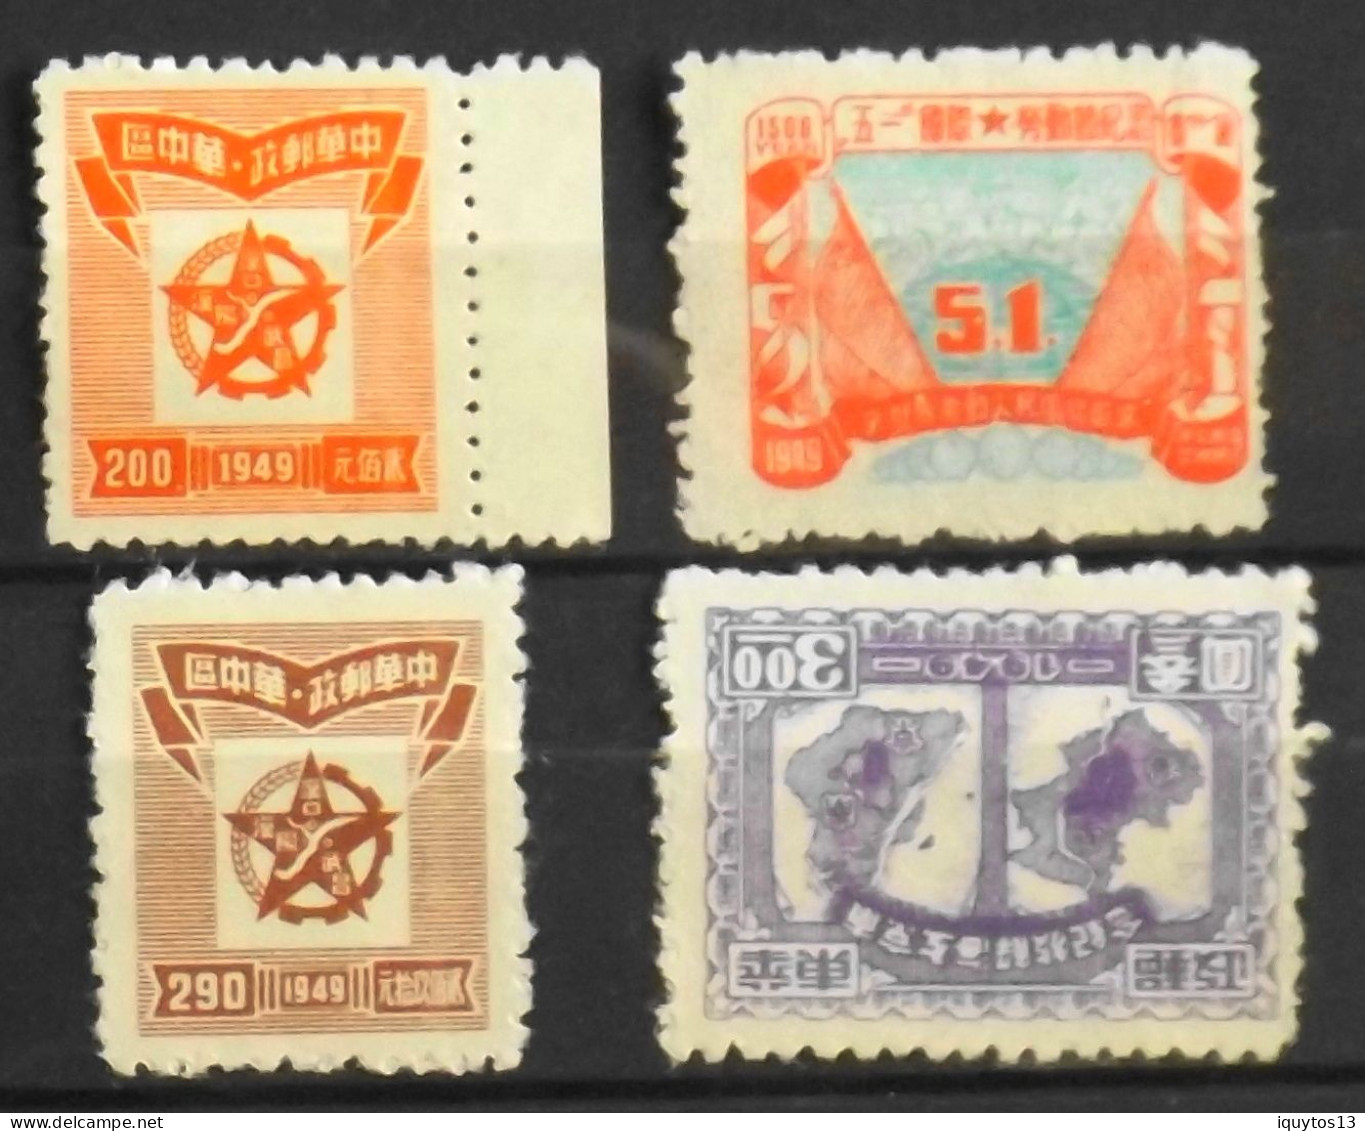 CHINE - ETOILE 1949 - 4 Timbres Neufs S.G. - Central China 1948-49